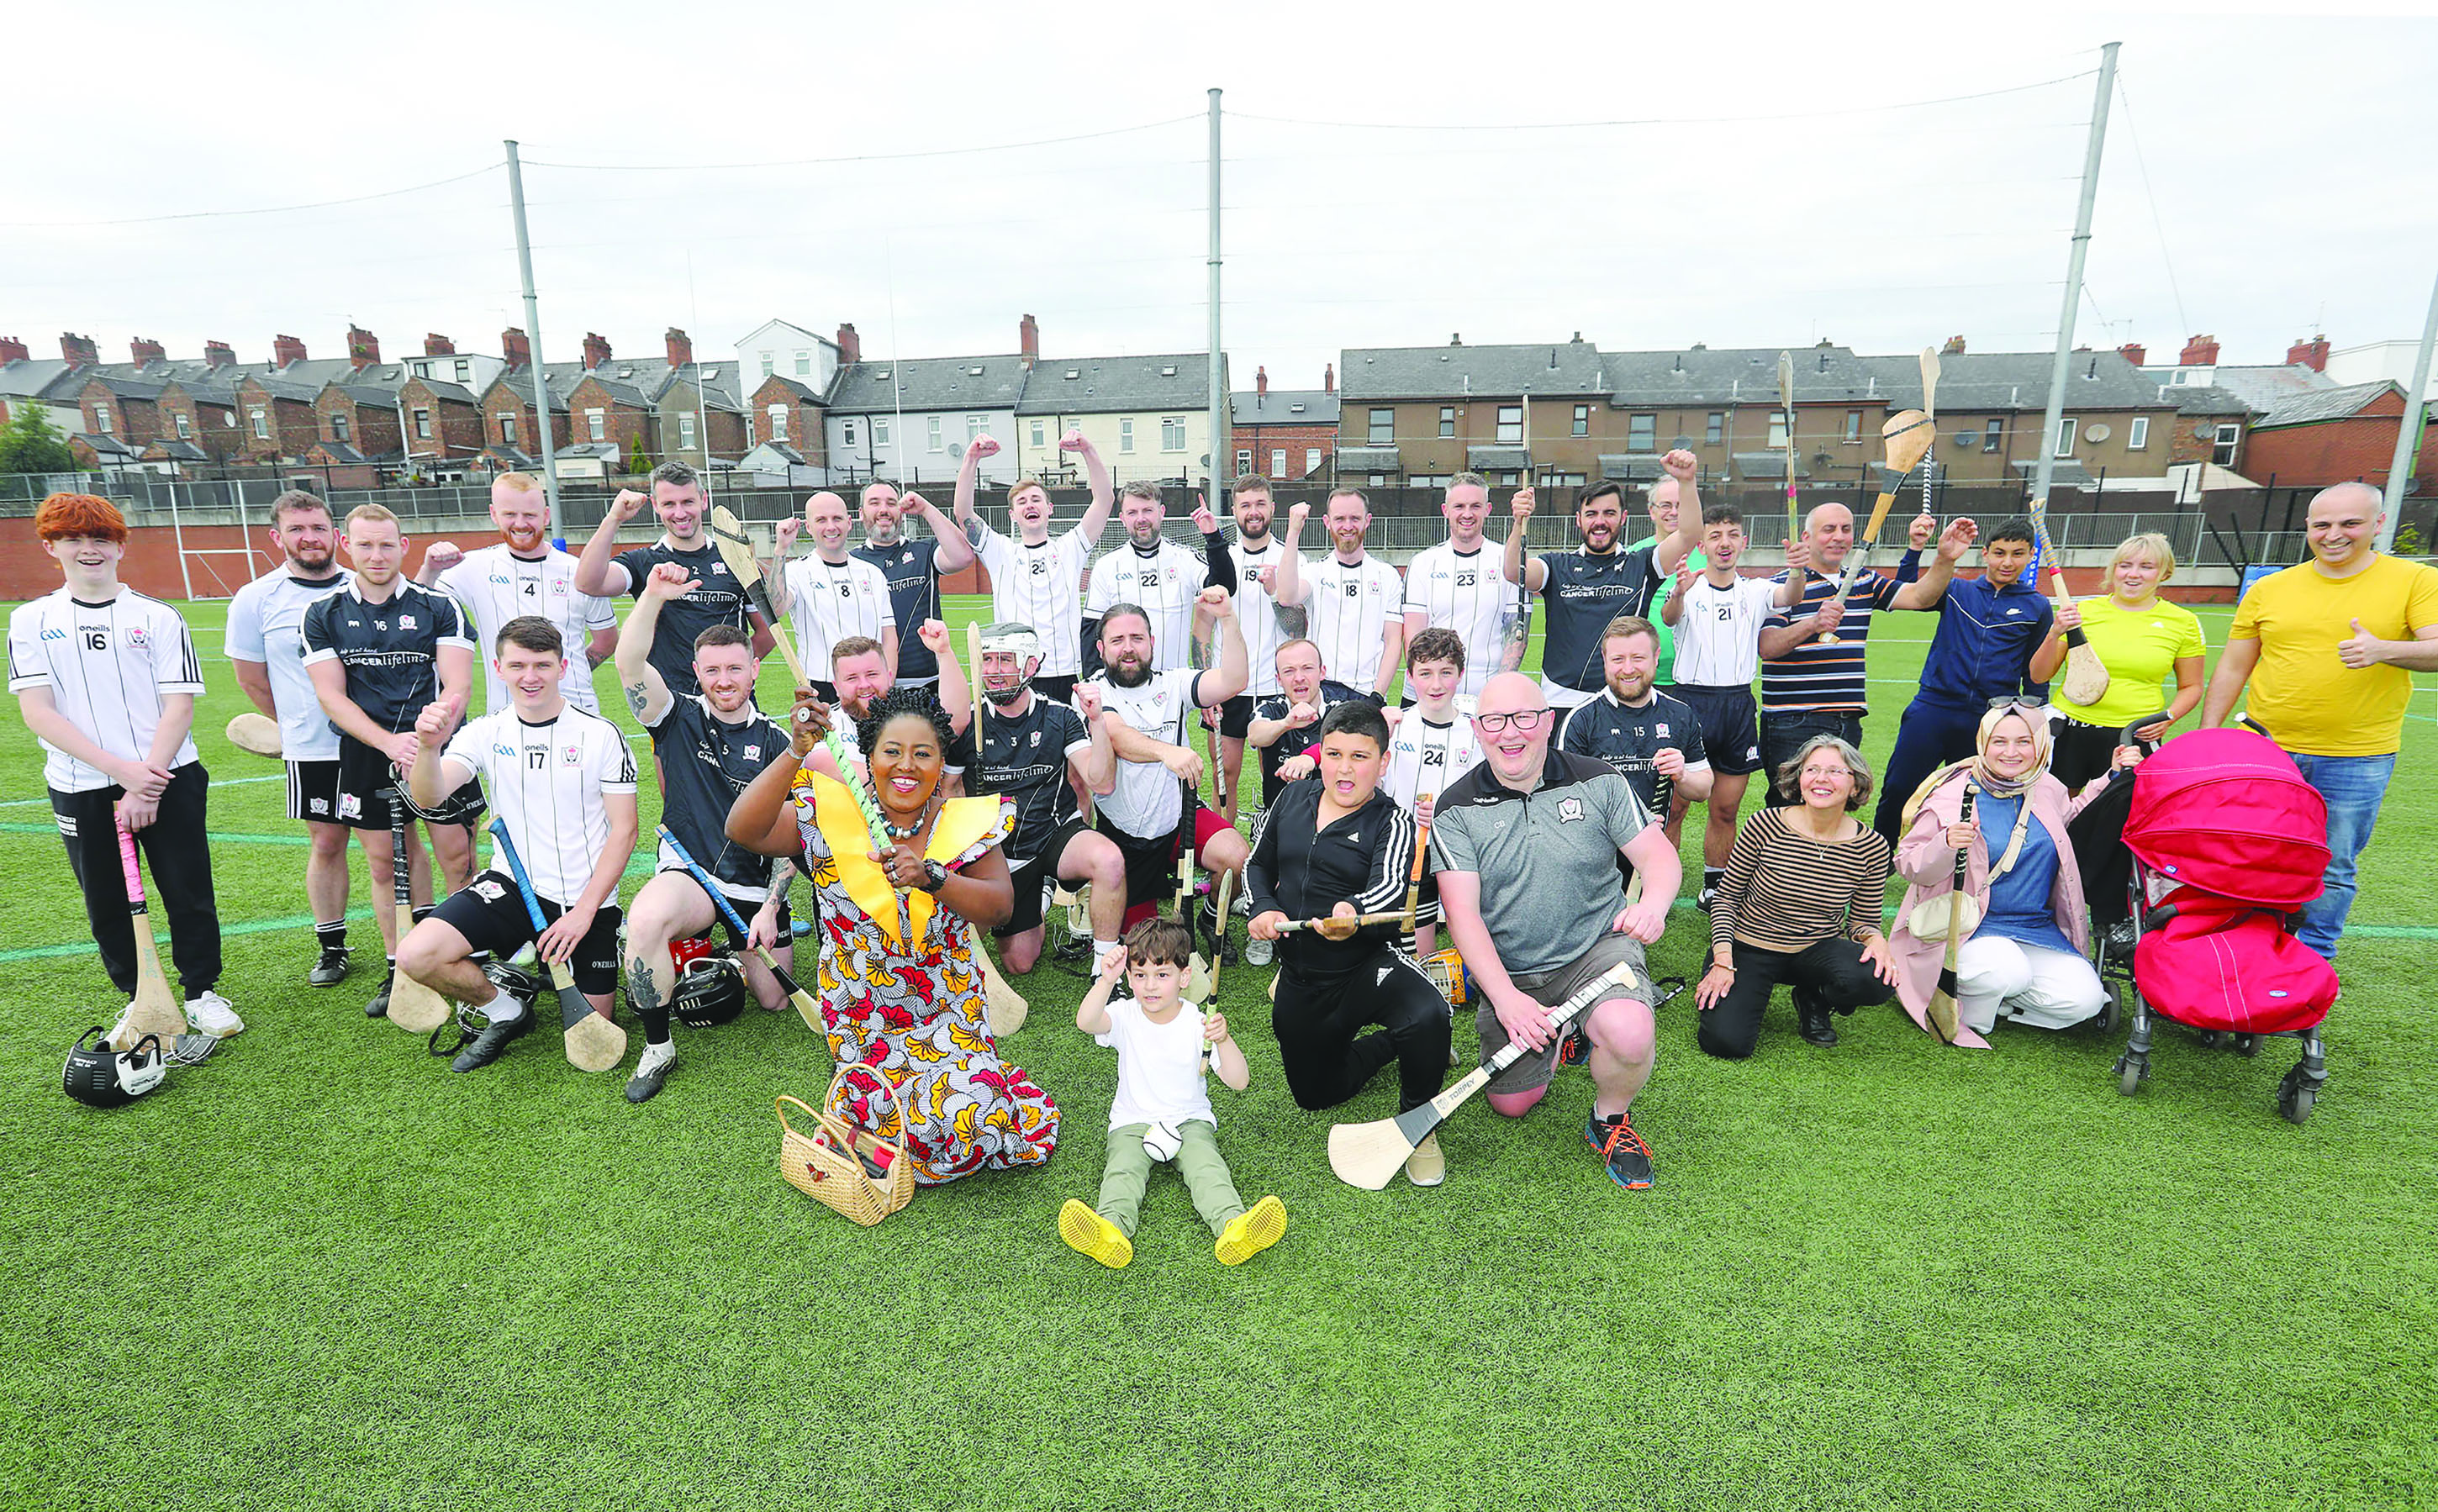 Ardoyne’s hurlers and newcomers to the sport at The Cricky on Sunday